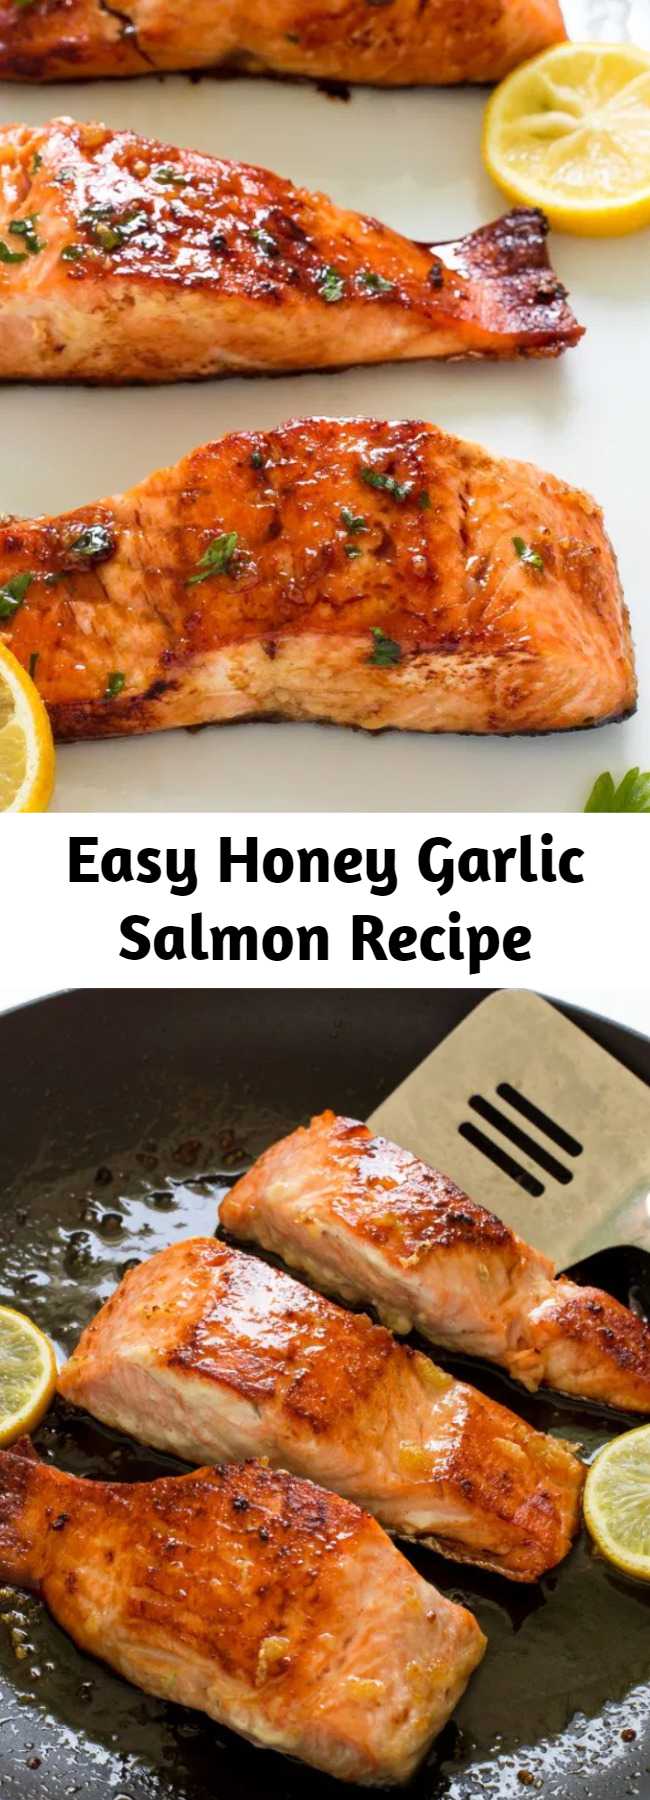 Easy Honey Garlic Salmon Recipe - Easy Honey Garlic Salmon. Pan fried and served with a sweet and sticky honey lemon glaze. Only 5 ingredients and ready in less than 20 minutes! This salmon is perfect for busy weeknight dinners! #recipe #honey #garlic #glazed #salmon #seafood